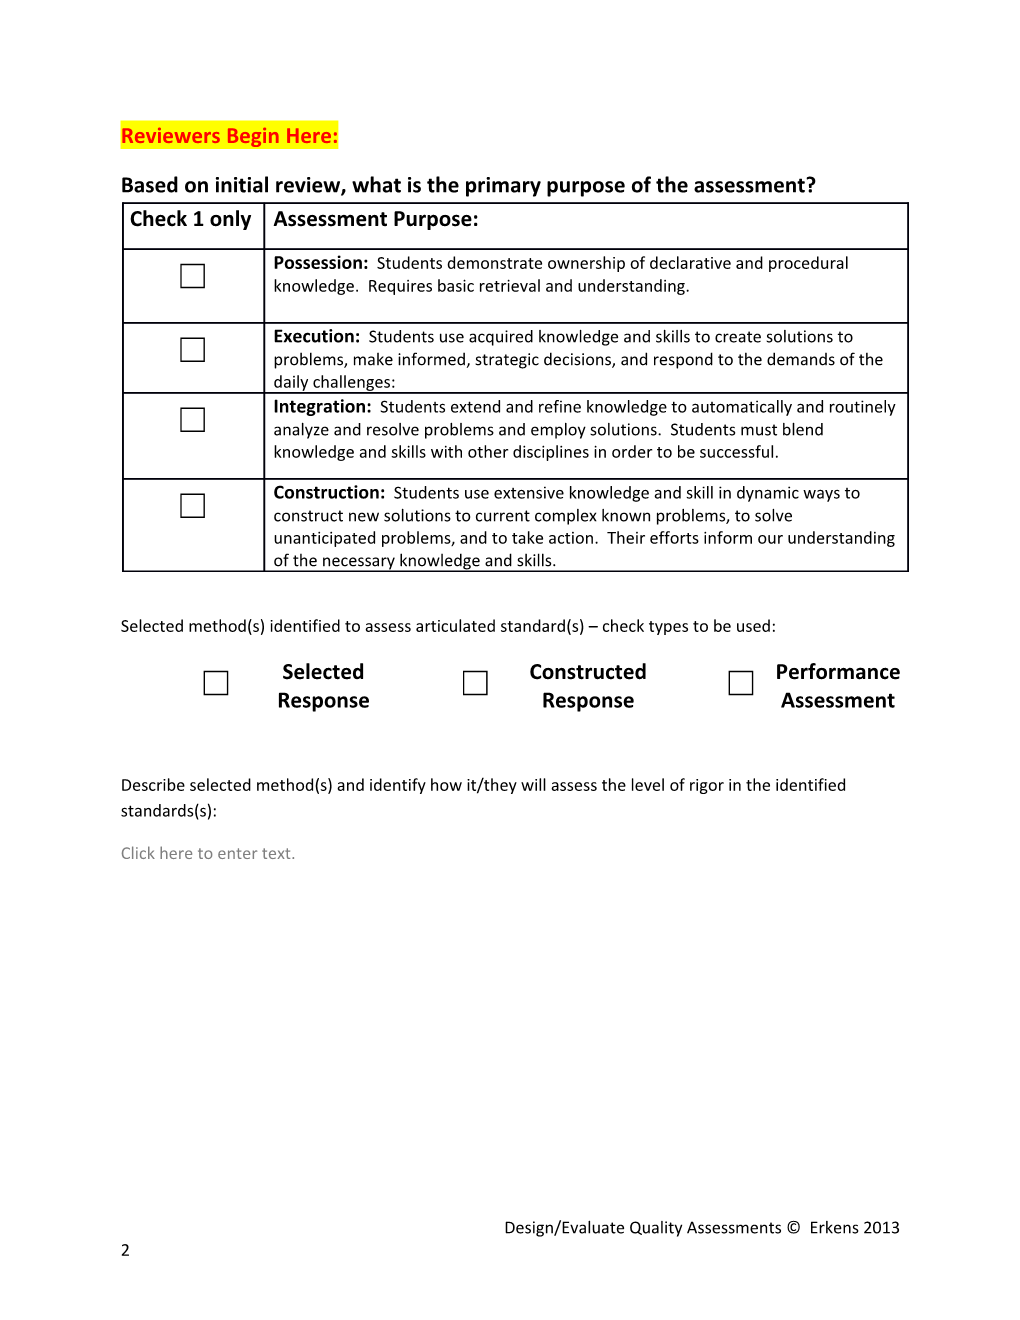 Assessment Review Protocol